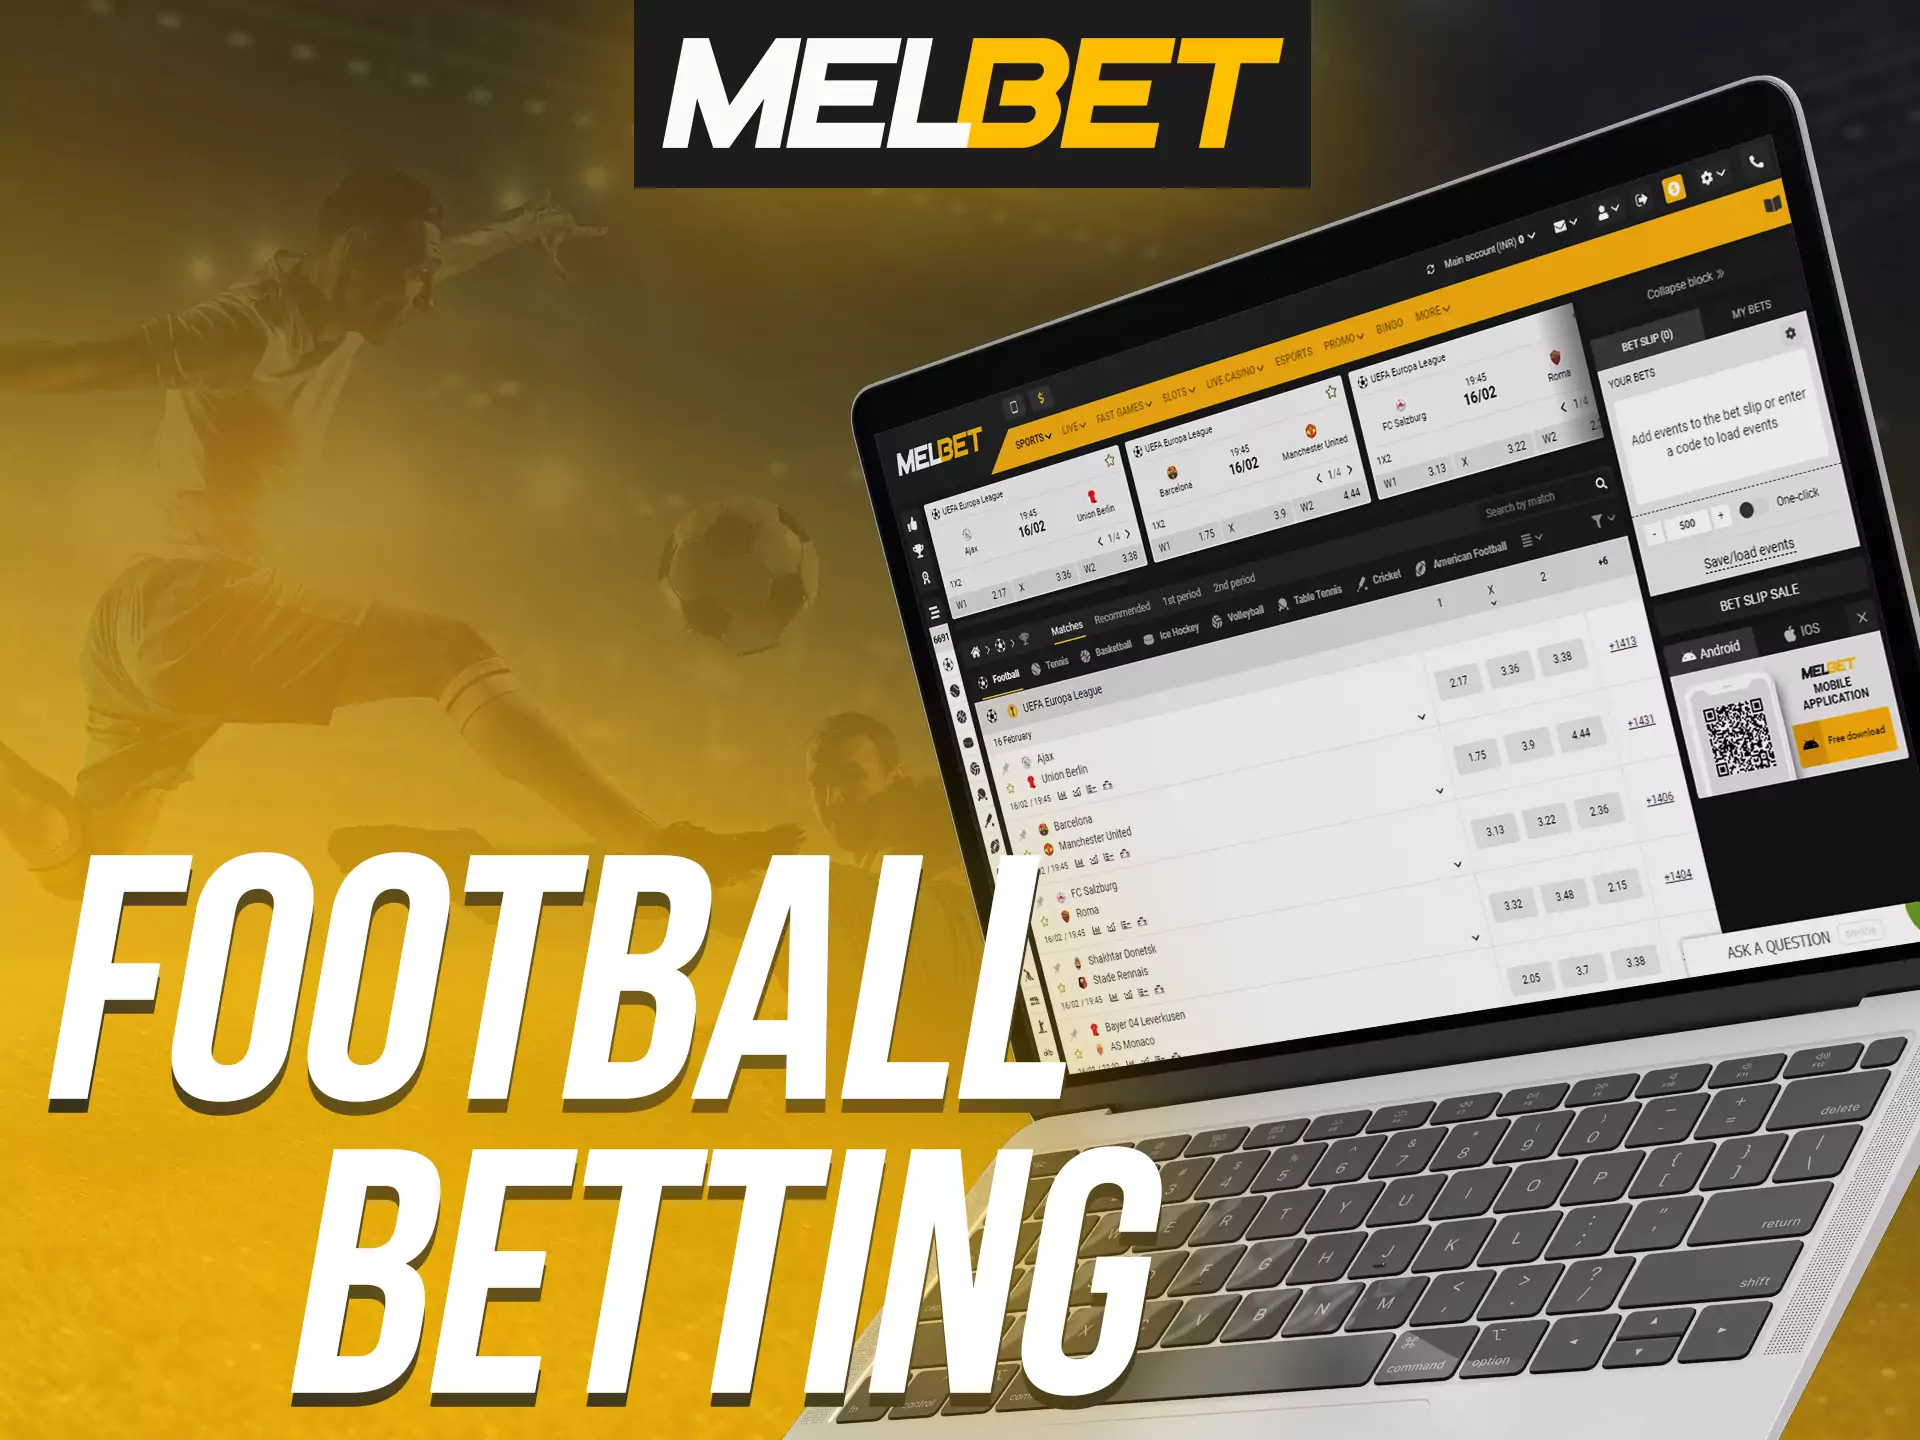 Bet on legendary football players at Melbet.